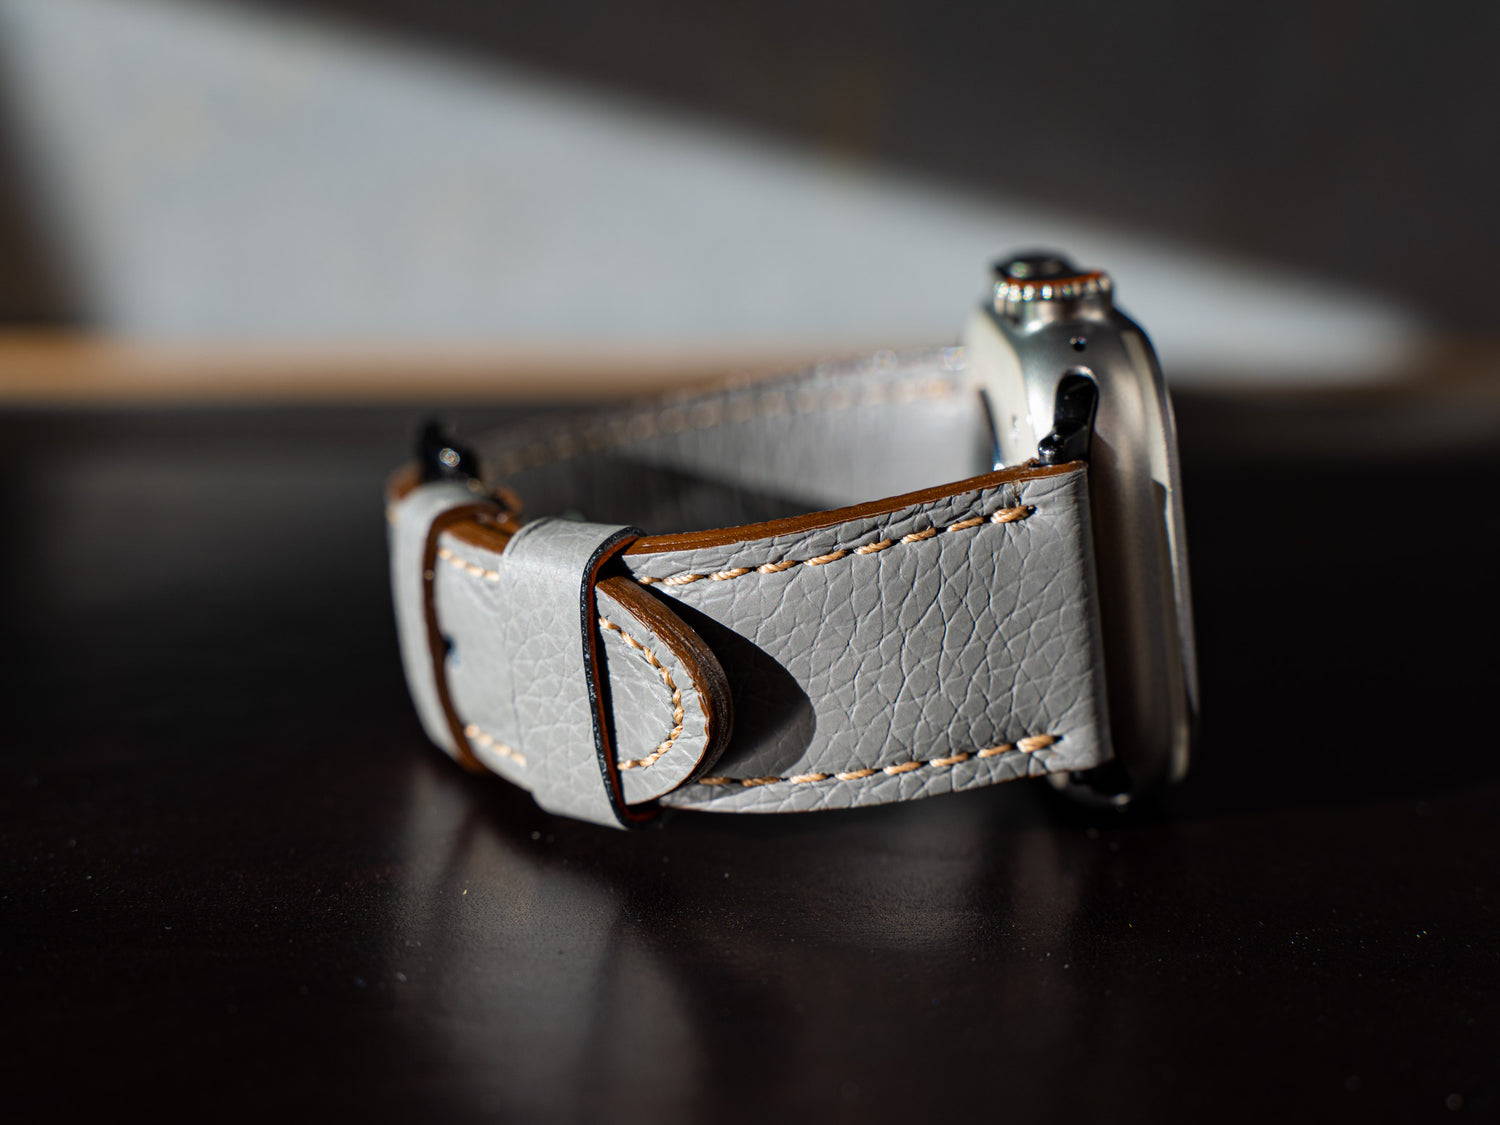 ITALIAN LEATHER APPLE WATCH BAND IN GRAY COLOR